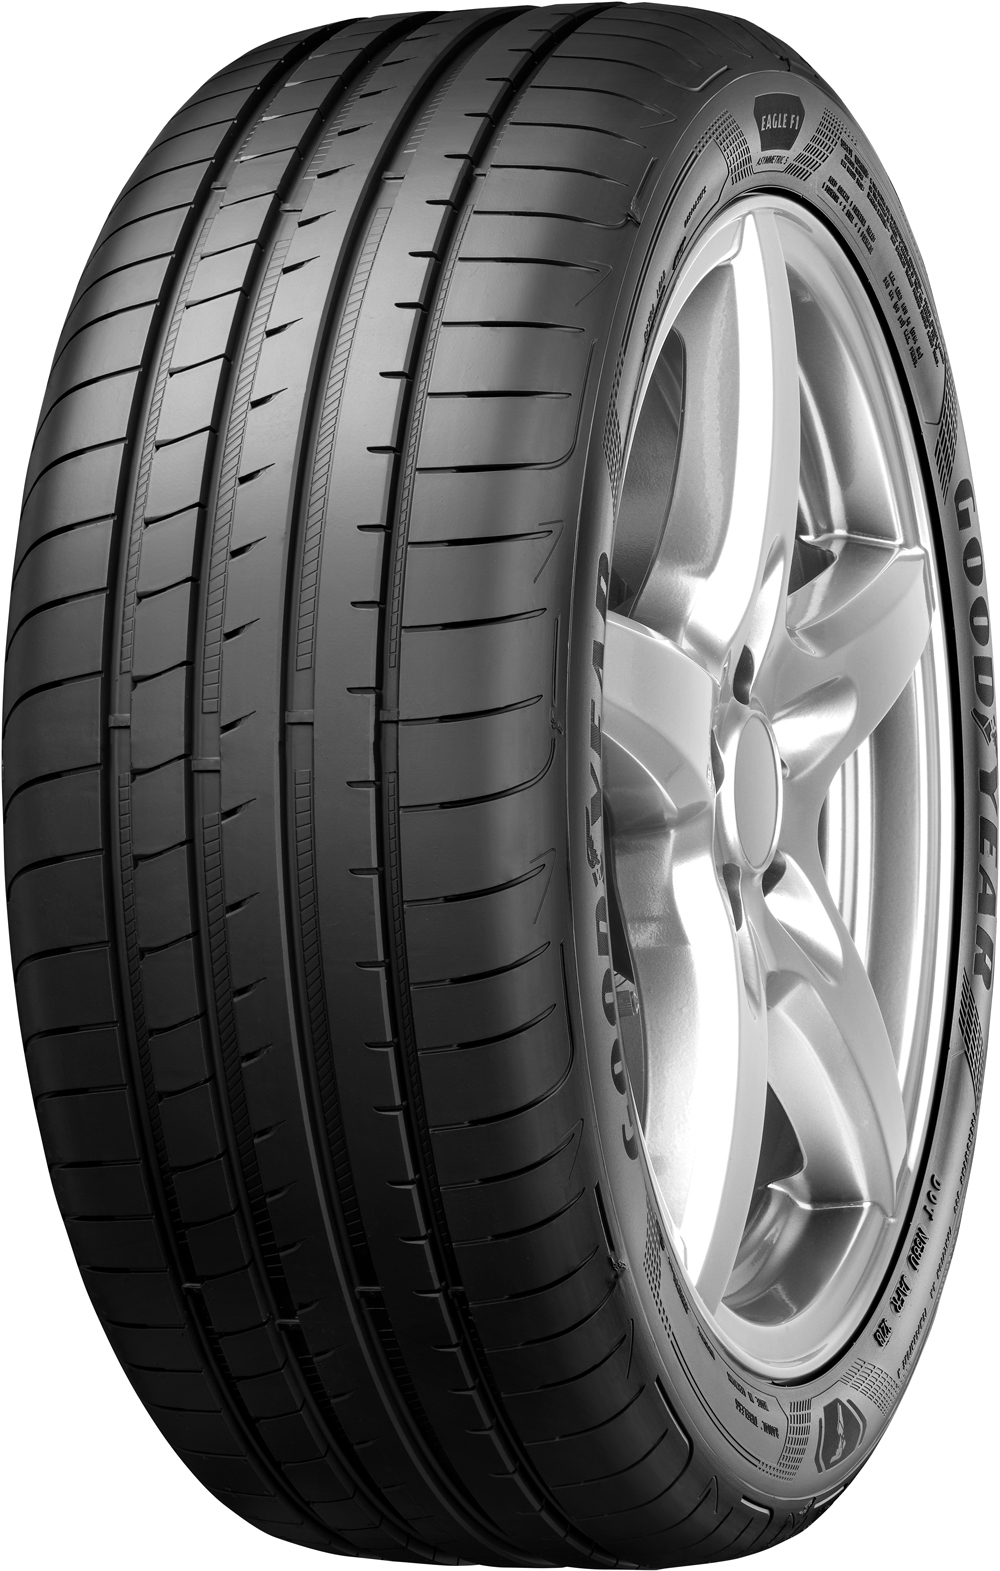 Anvelope auto GOODYEAR EAGF1AS5MX XL MERCEDES FP 245/40 R18 97Y